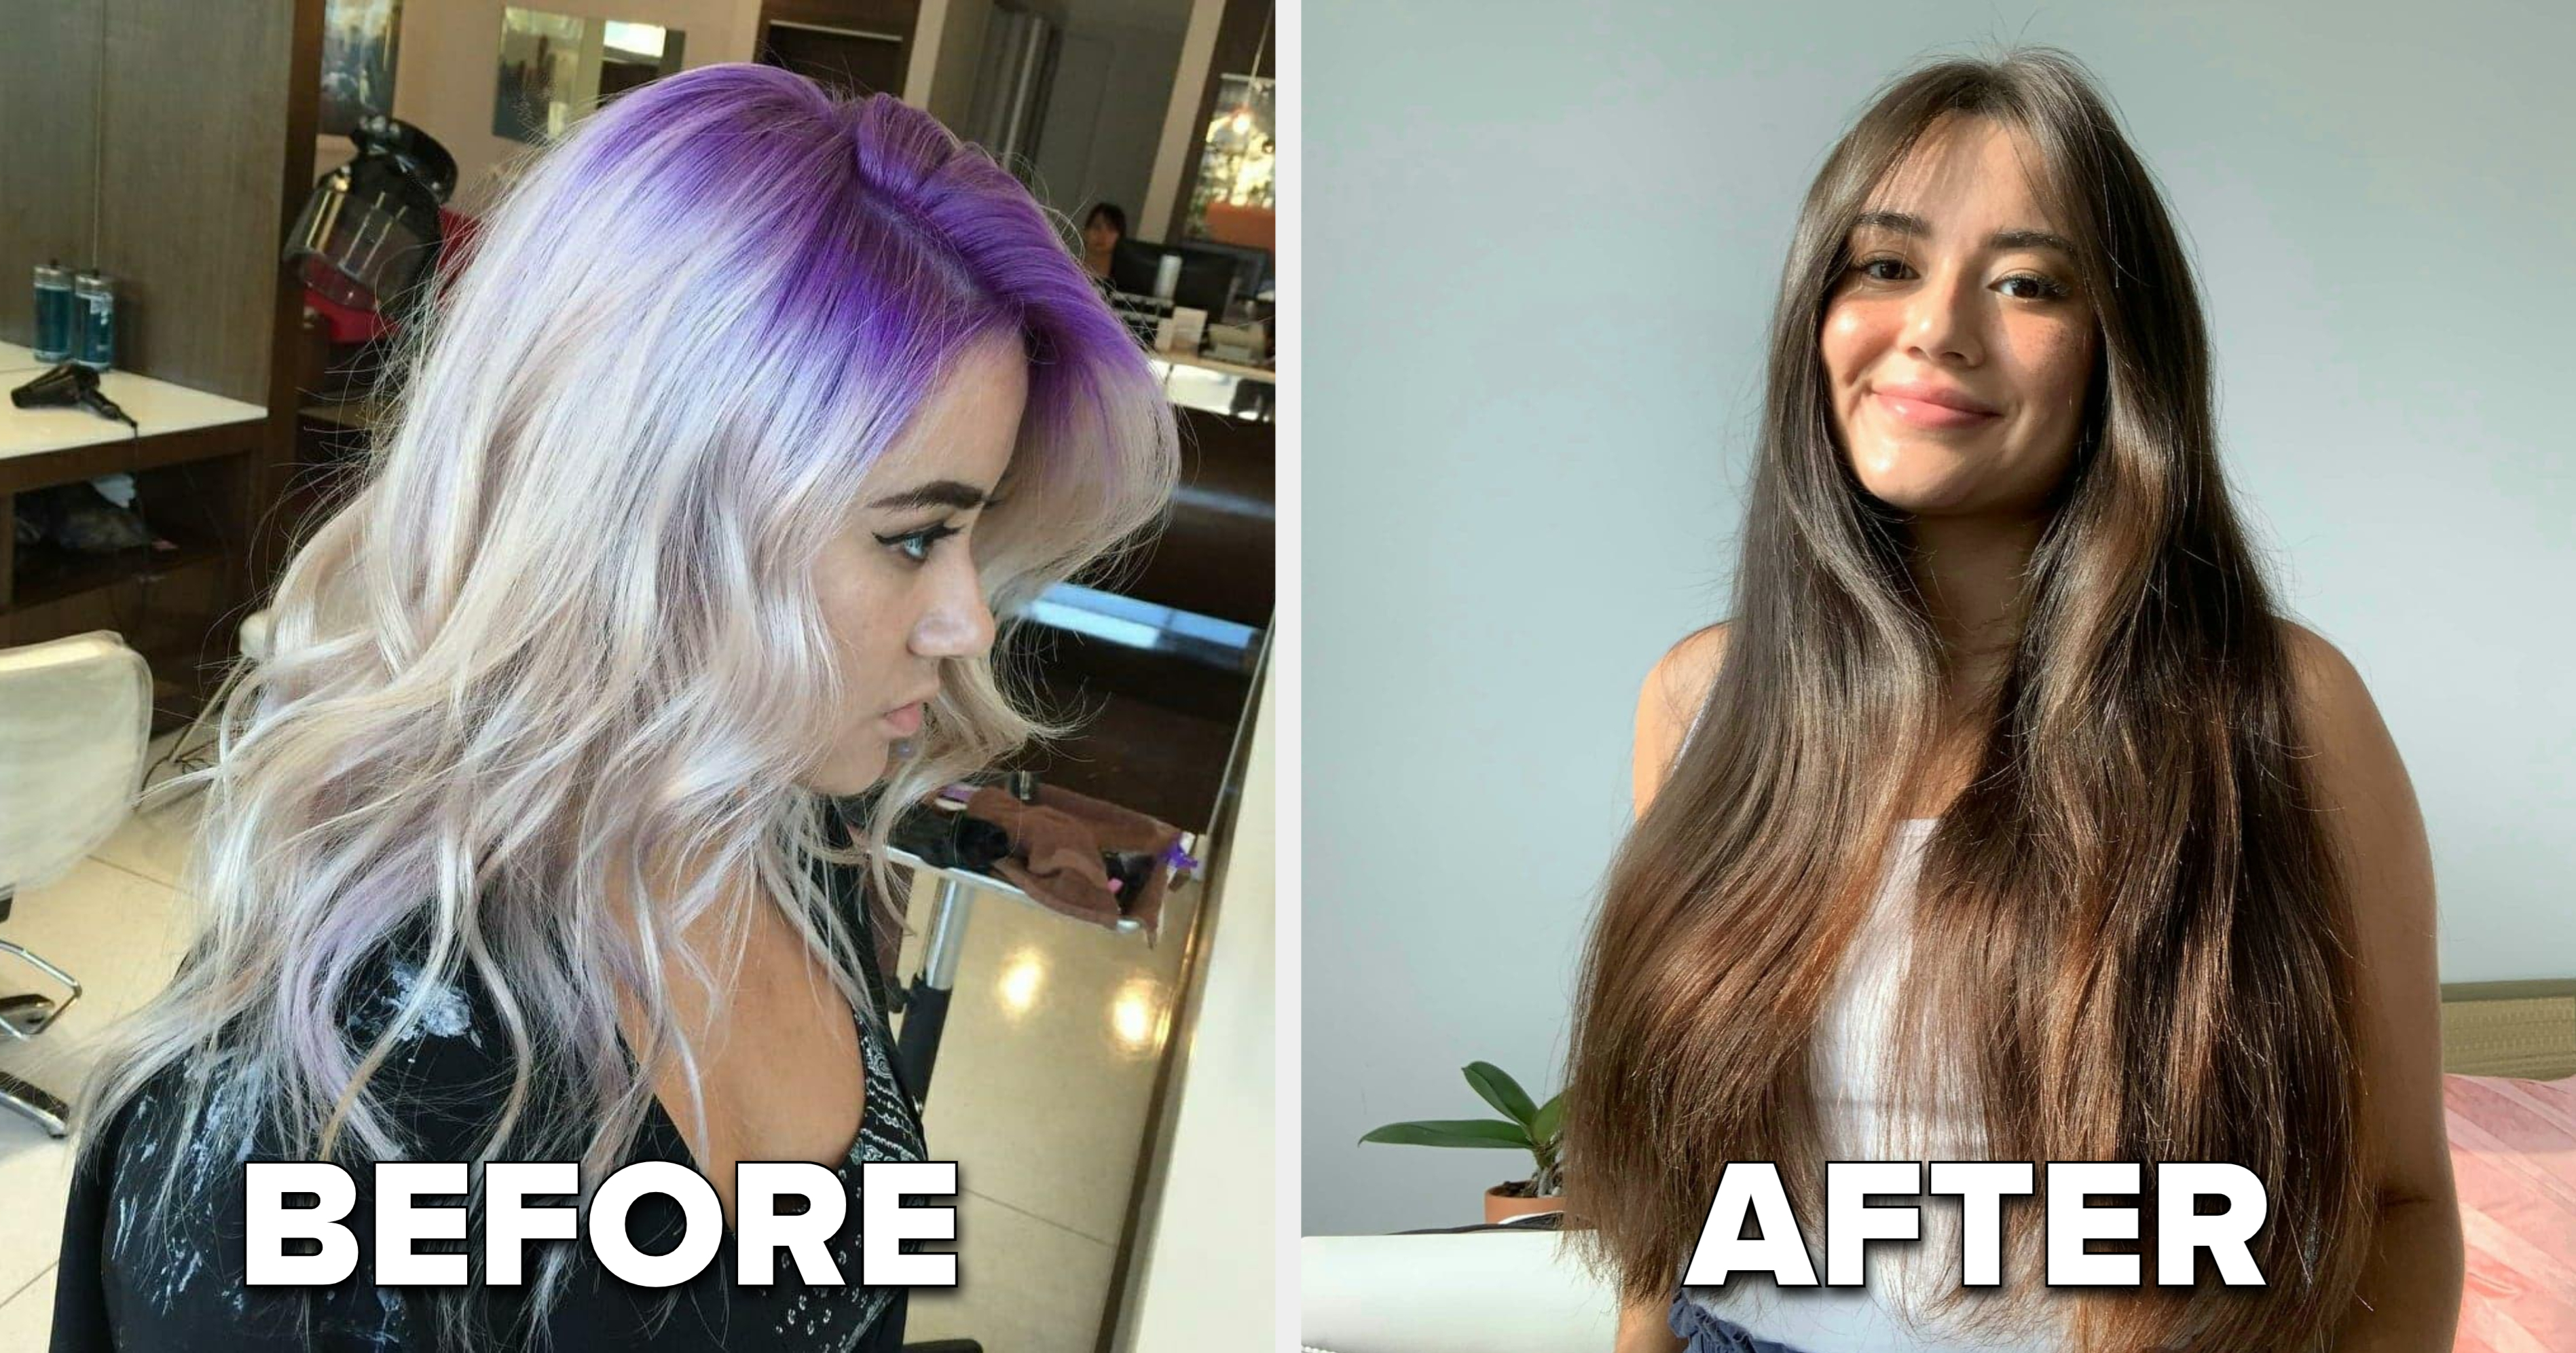 I Tried 10 Tips To Grow Out My Hair And Here's What Actually Works